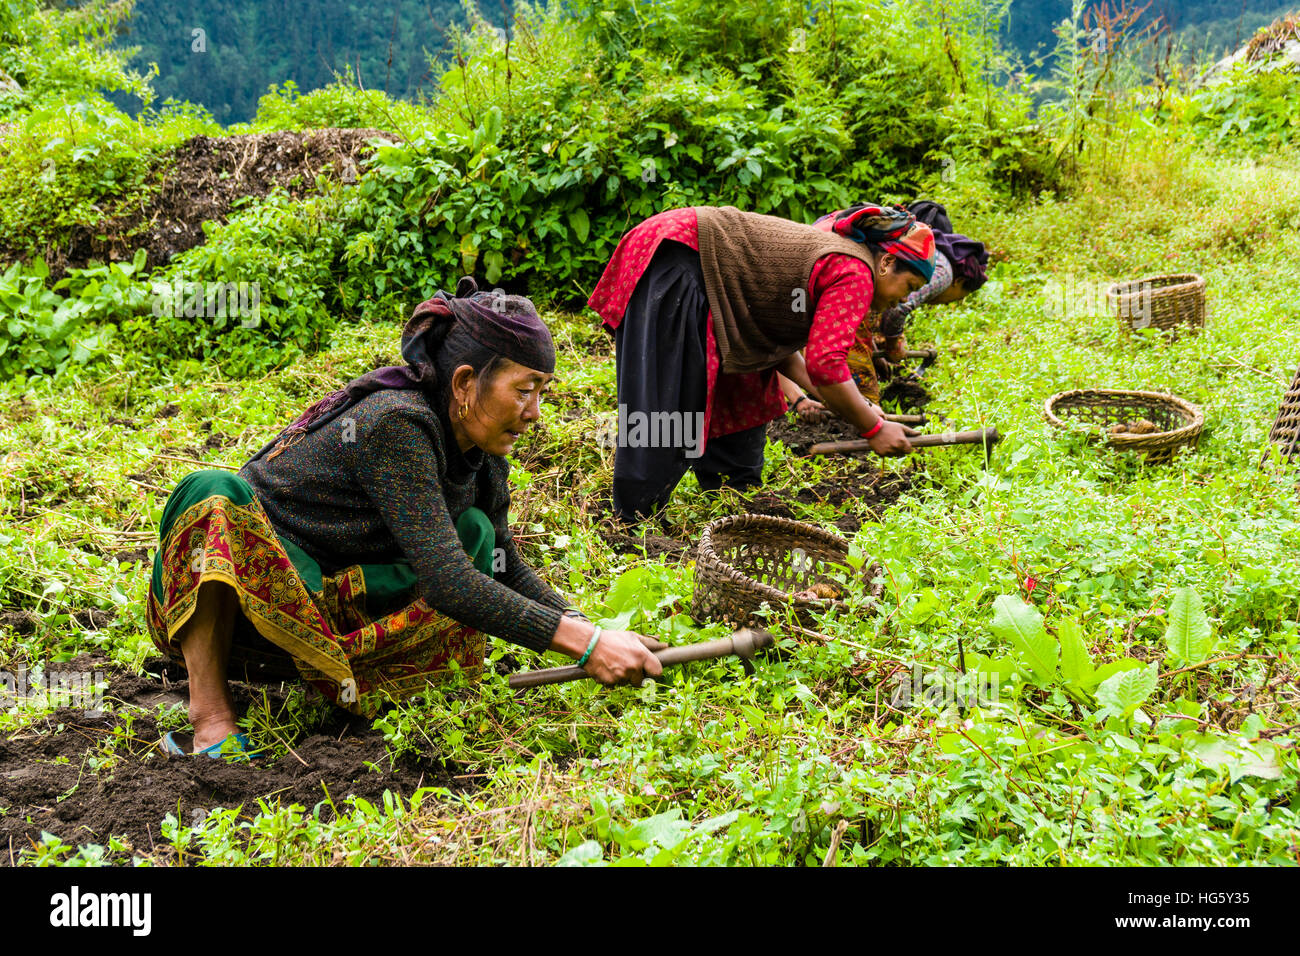 Local women are harvesting potatoes on a green field, Timang, Manang District, Nepal Stock Photo